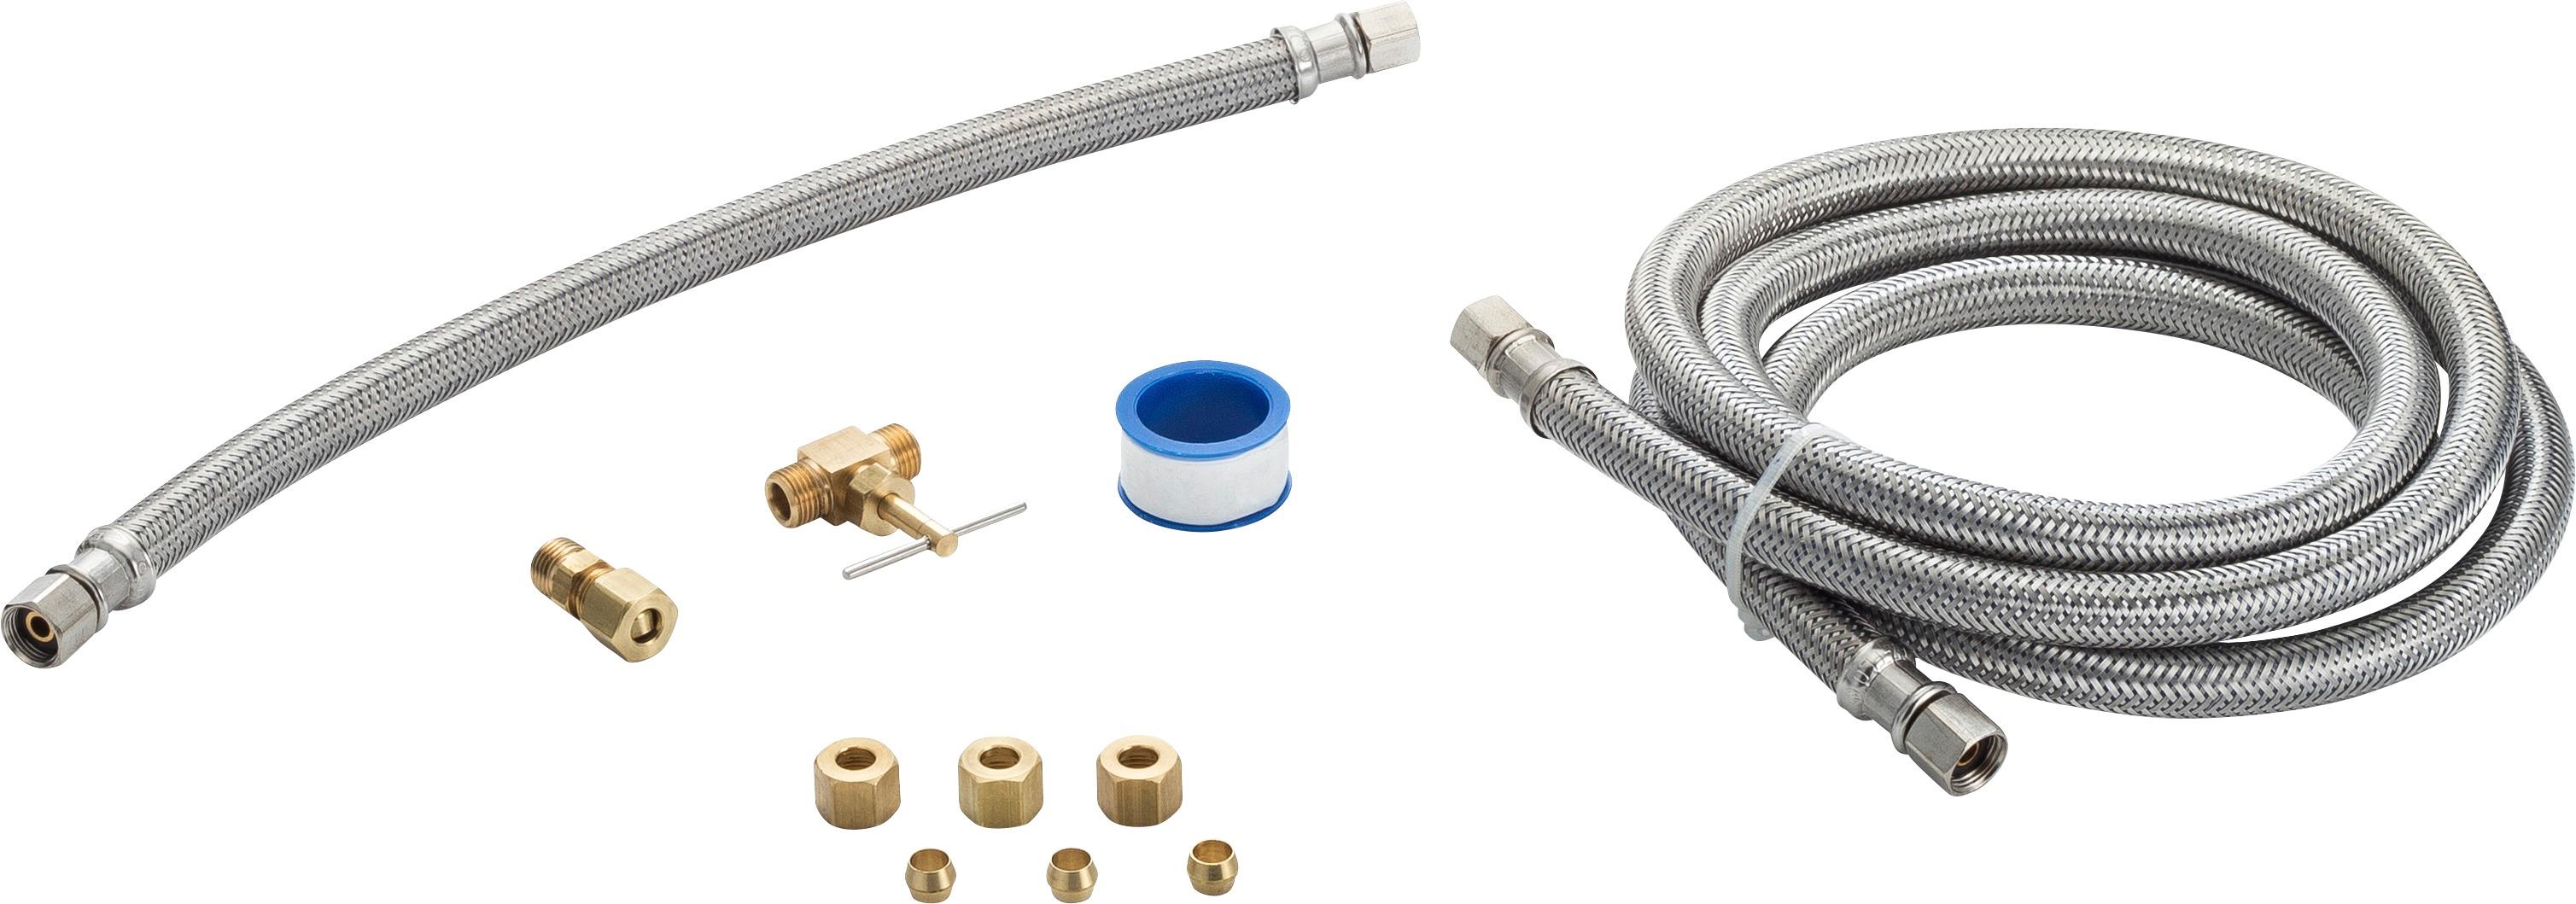 W10267701RPKitchenAid Refrigerator Water Line Installation Kit OTHER -  King's Great Buys Plus